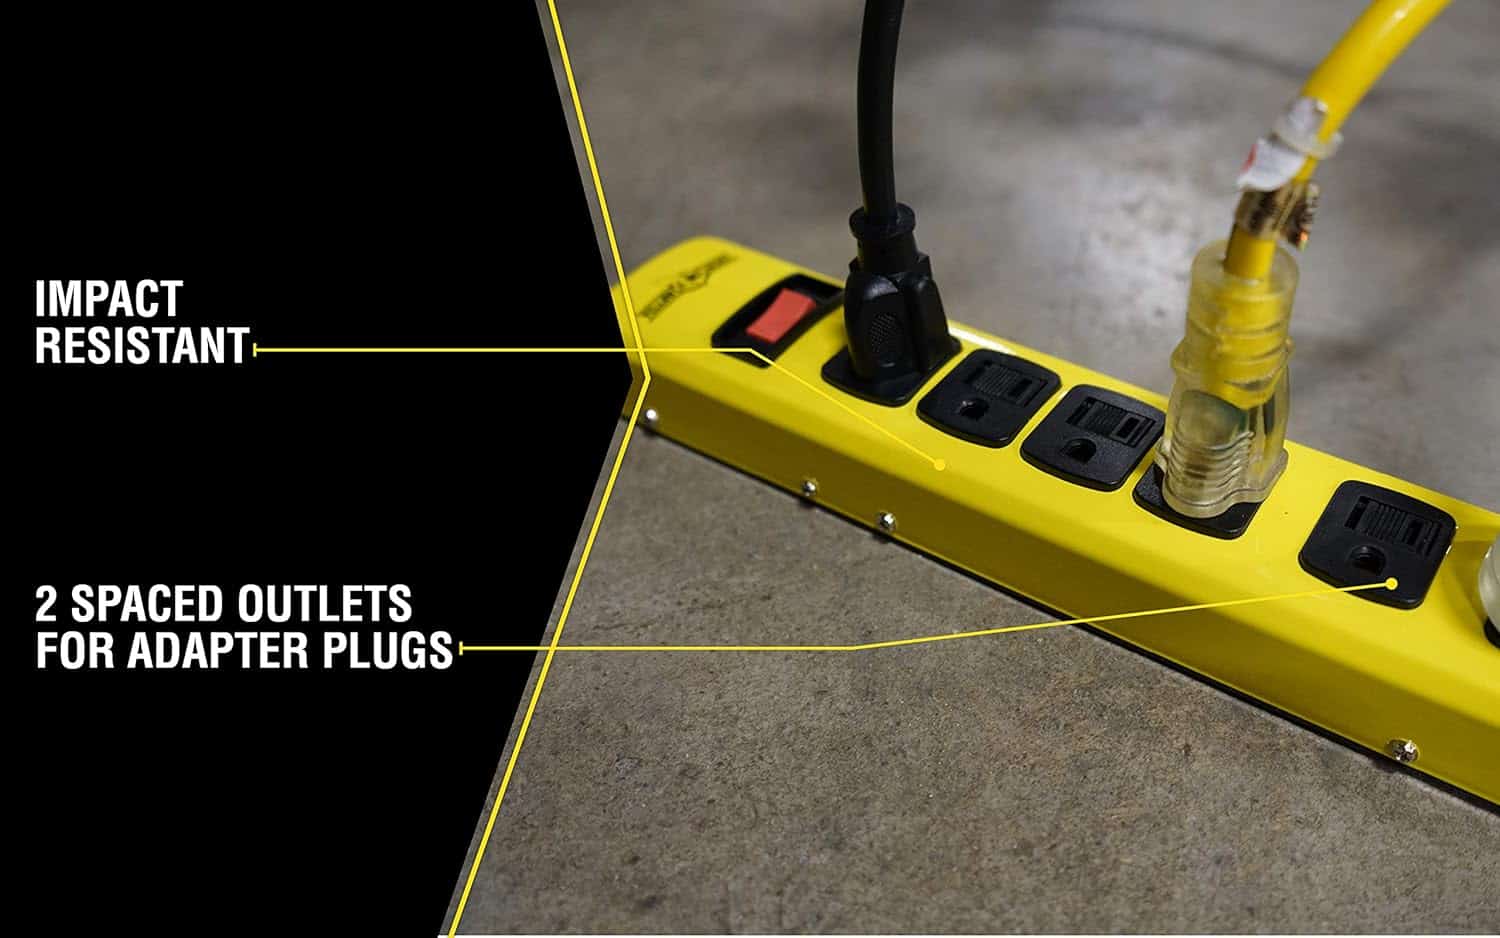 Yellow-Jacket-5139N-14-3-6-Outlet-Heavy-Duty-Industrial-Metal-Workshop-Strip-with-6-Foot-Power-Cord-Sliding-Safety-Covers-and-Overload-Protection